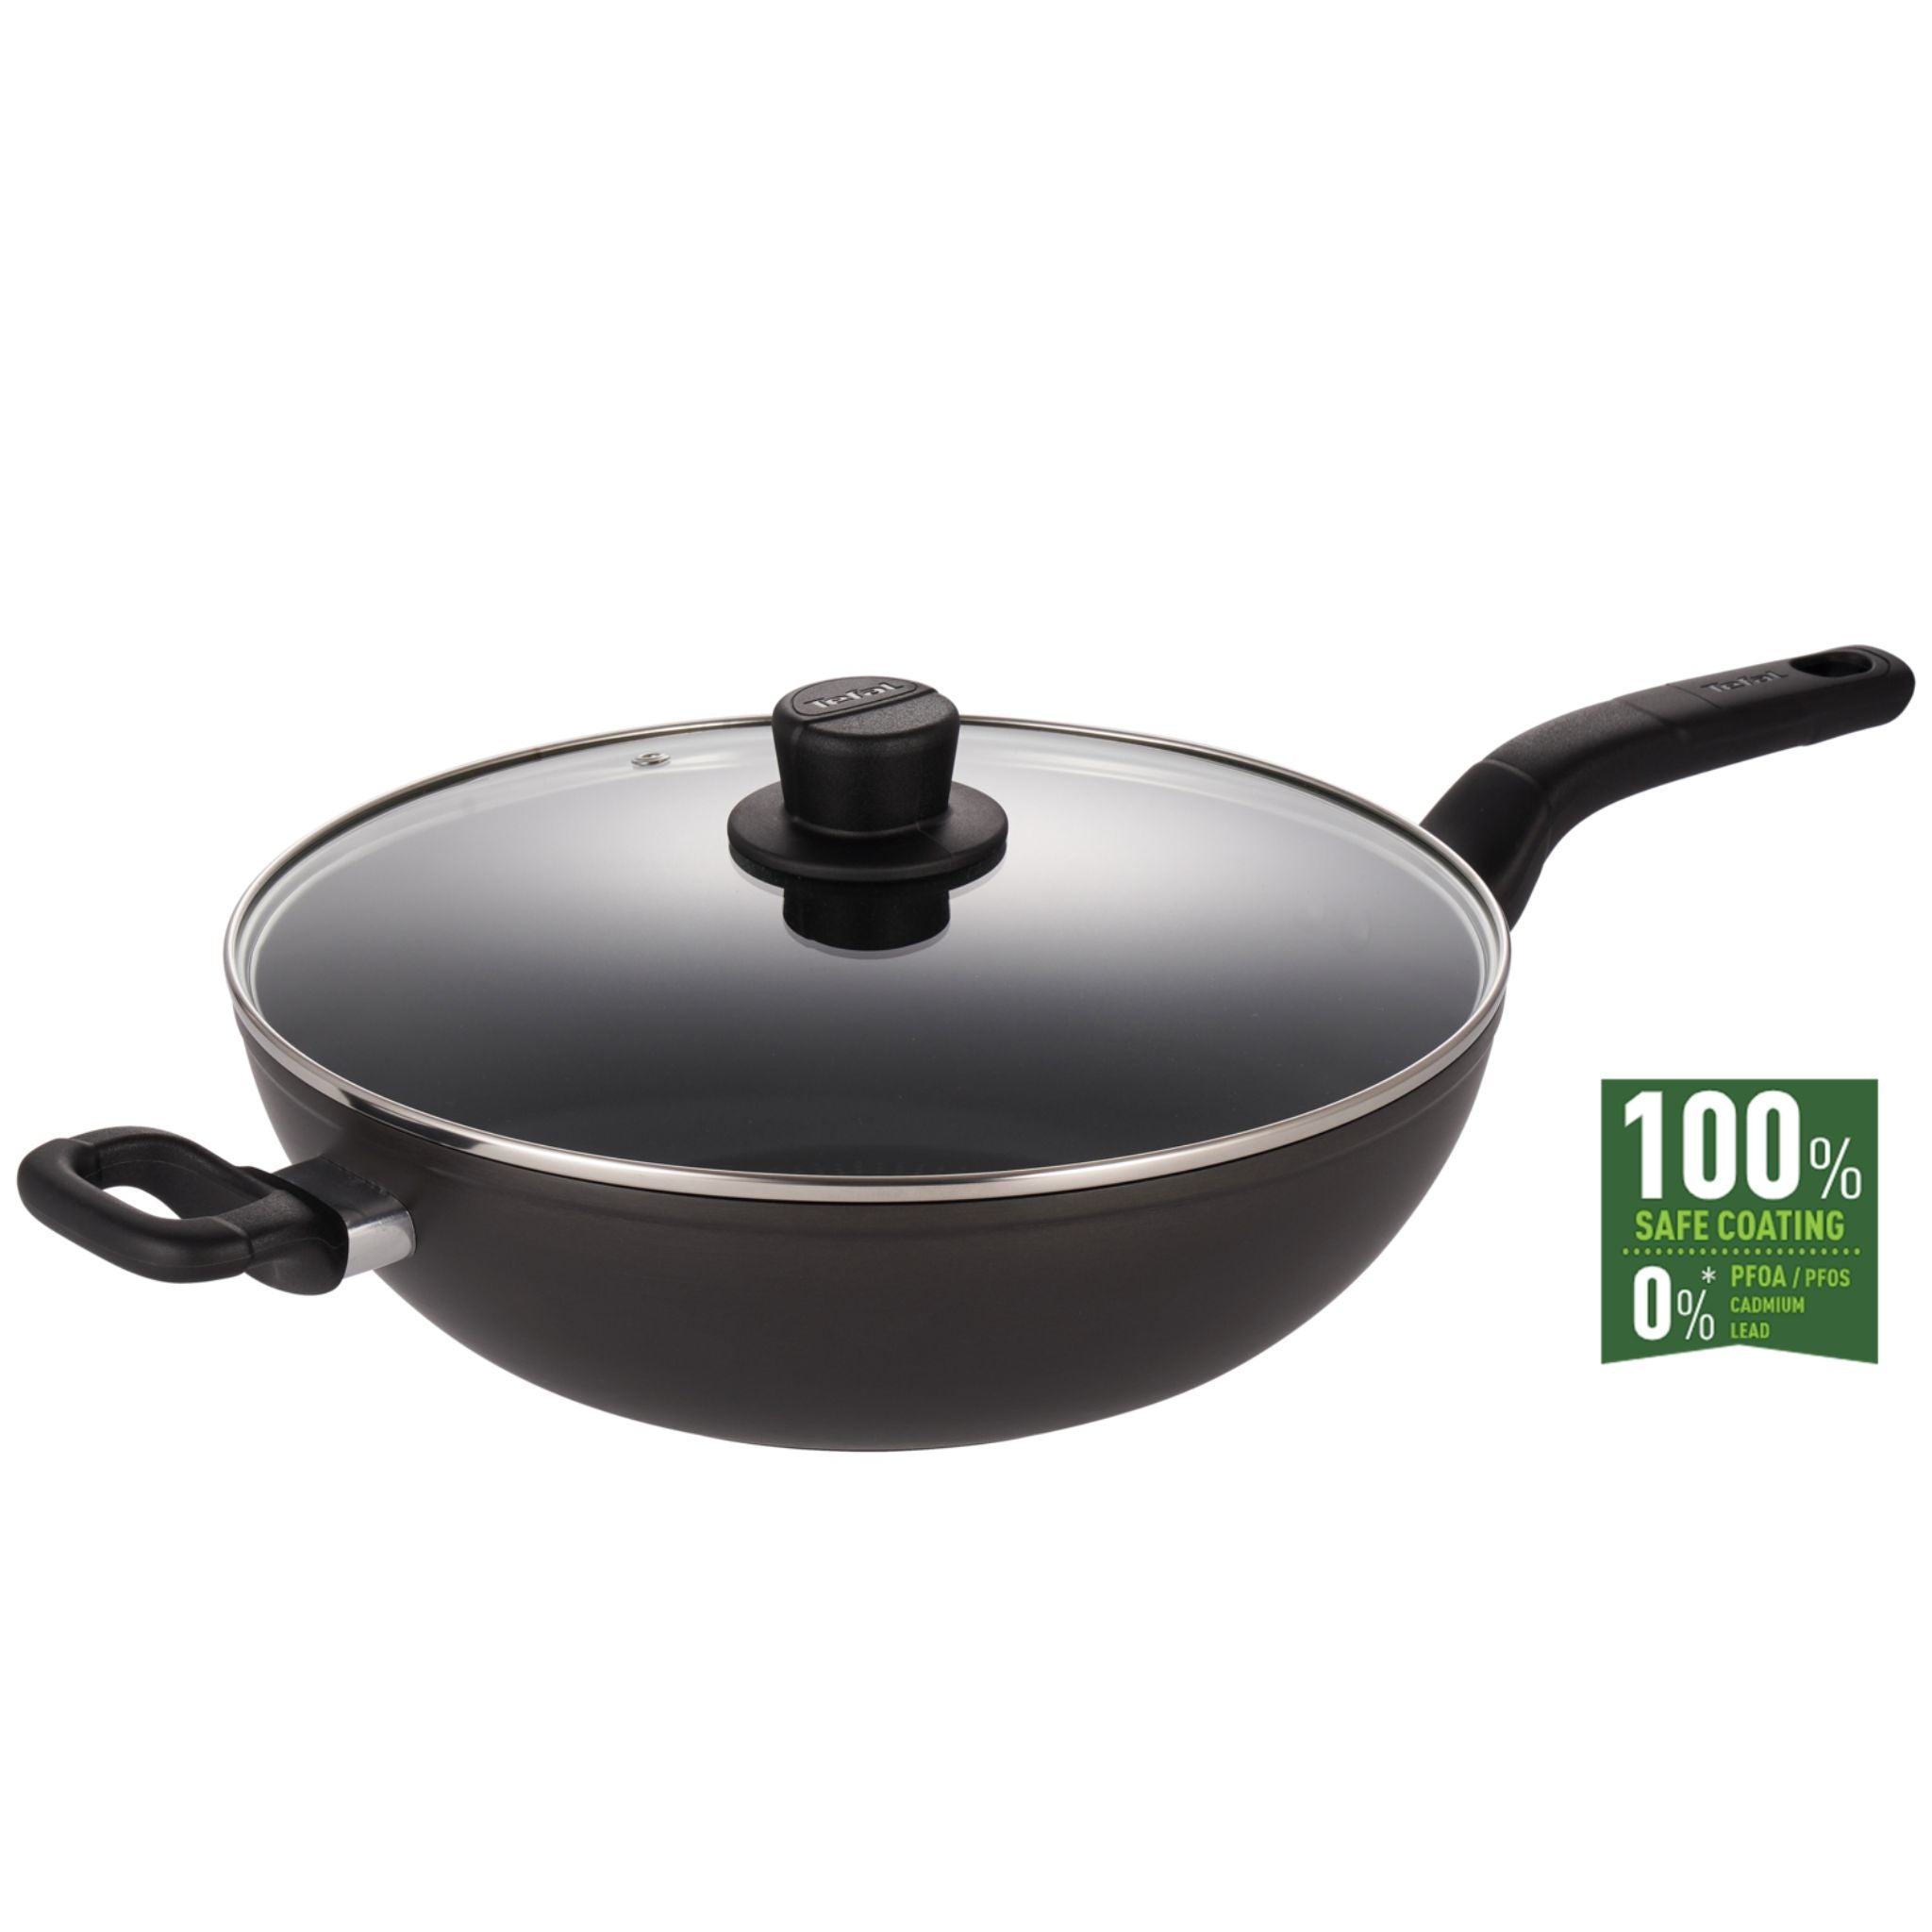 Tefal Induction Non-Stick Wok 28cm In Bronze